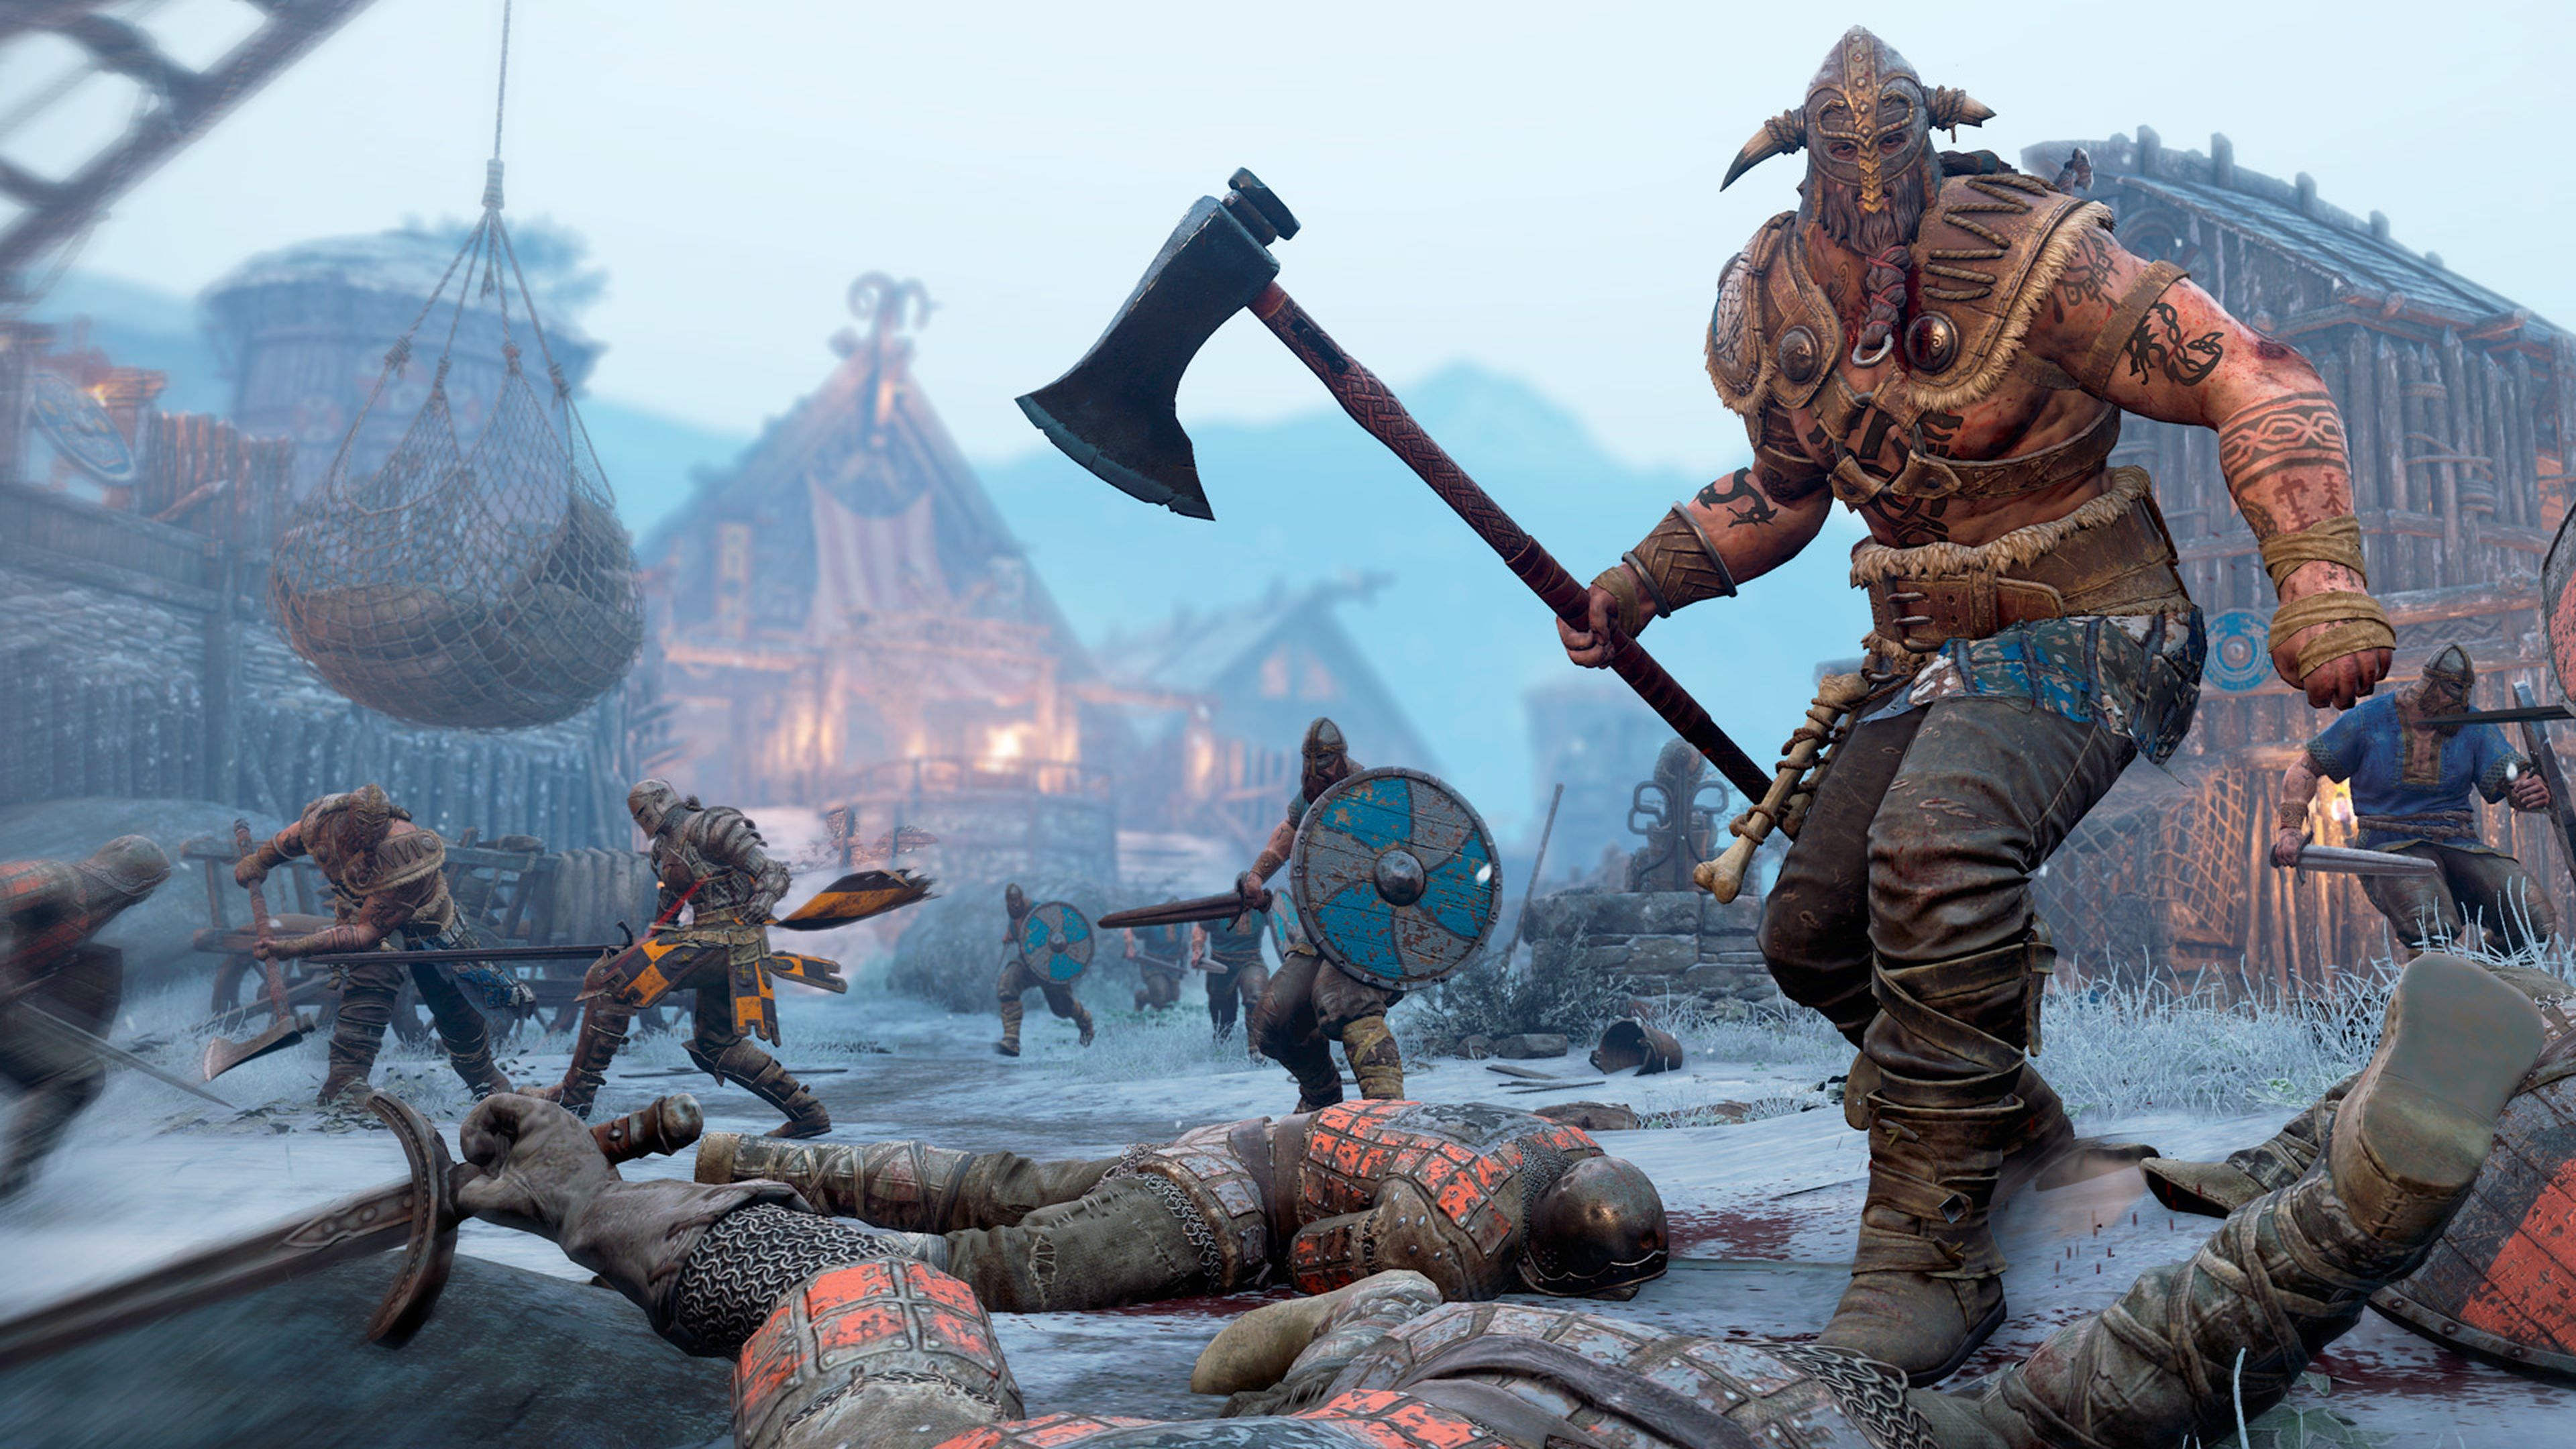 Gameplay For Honor modos lucha